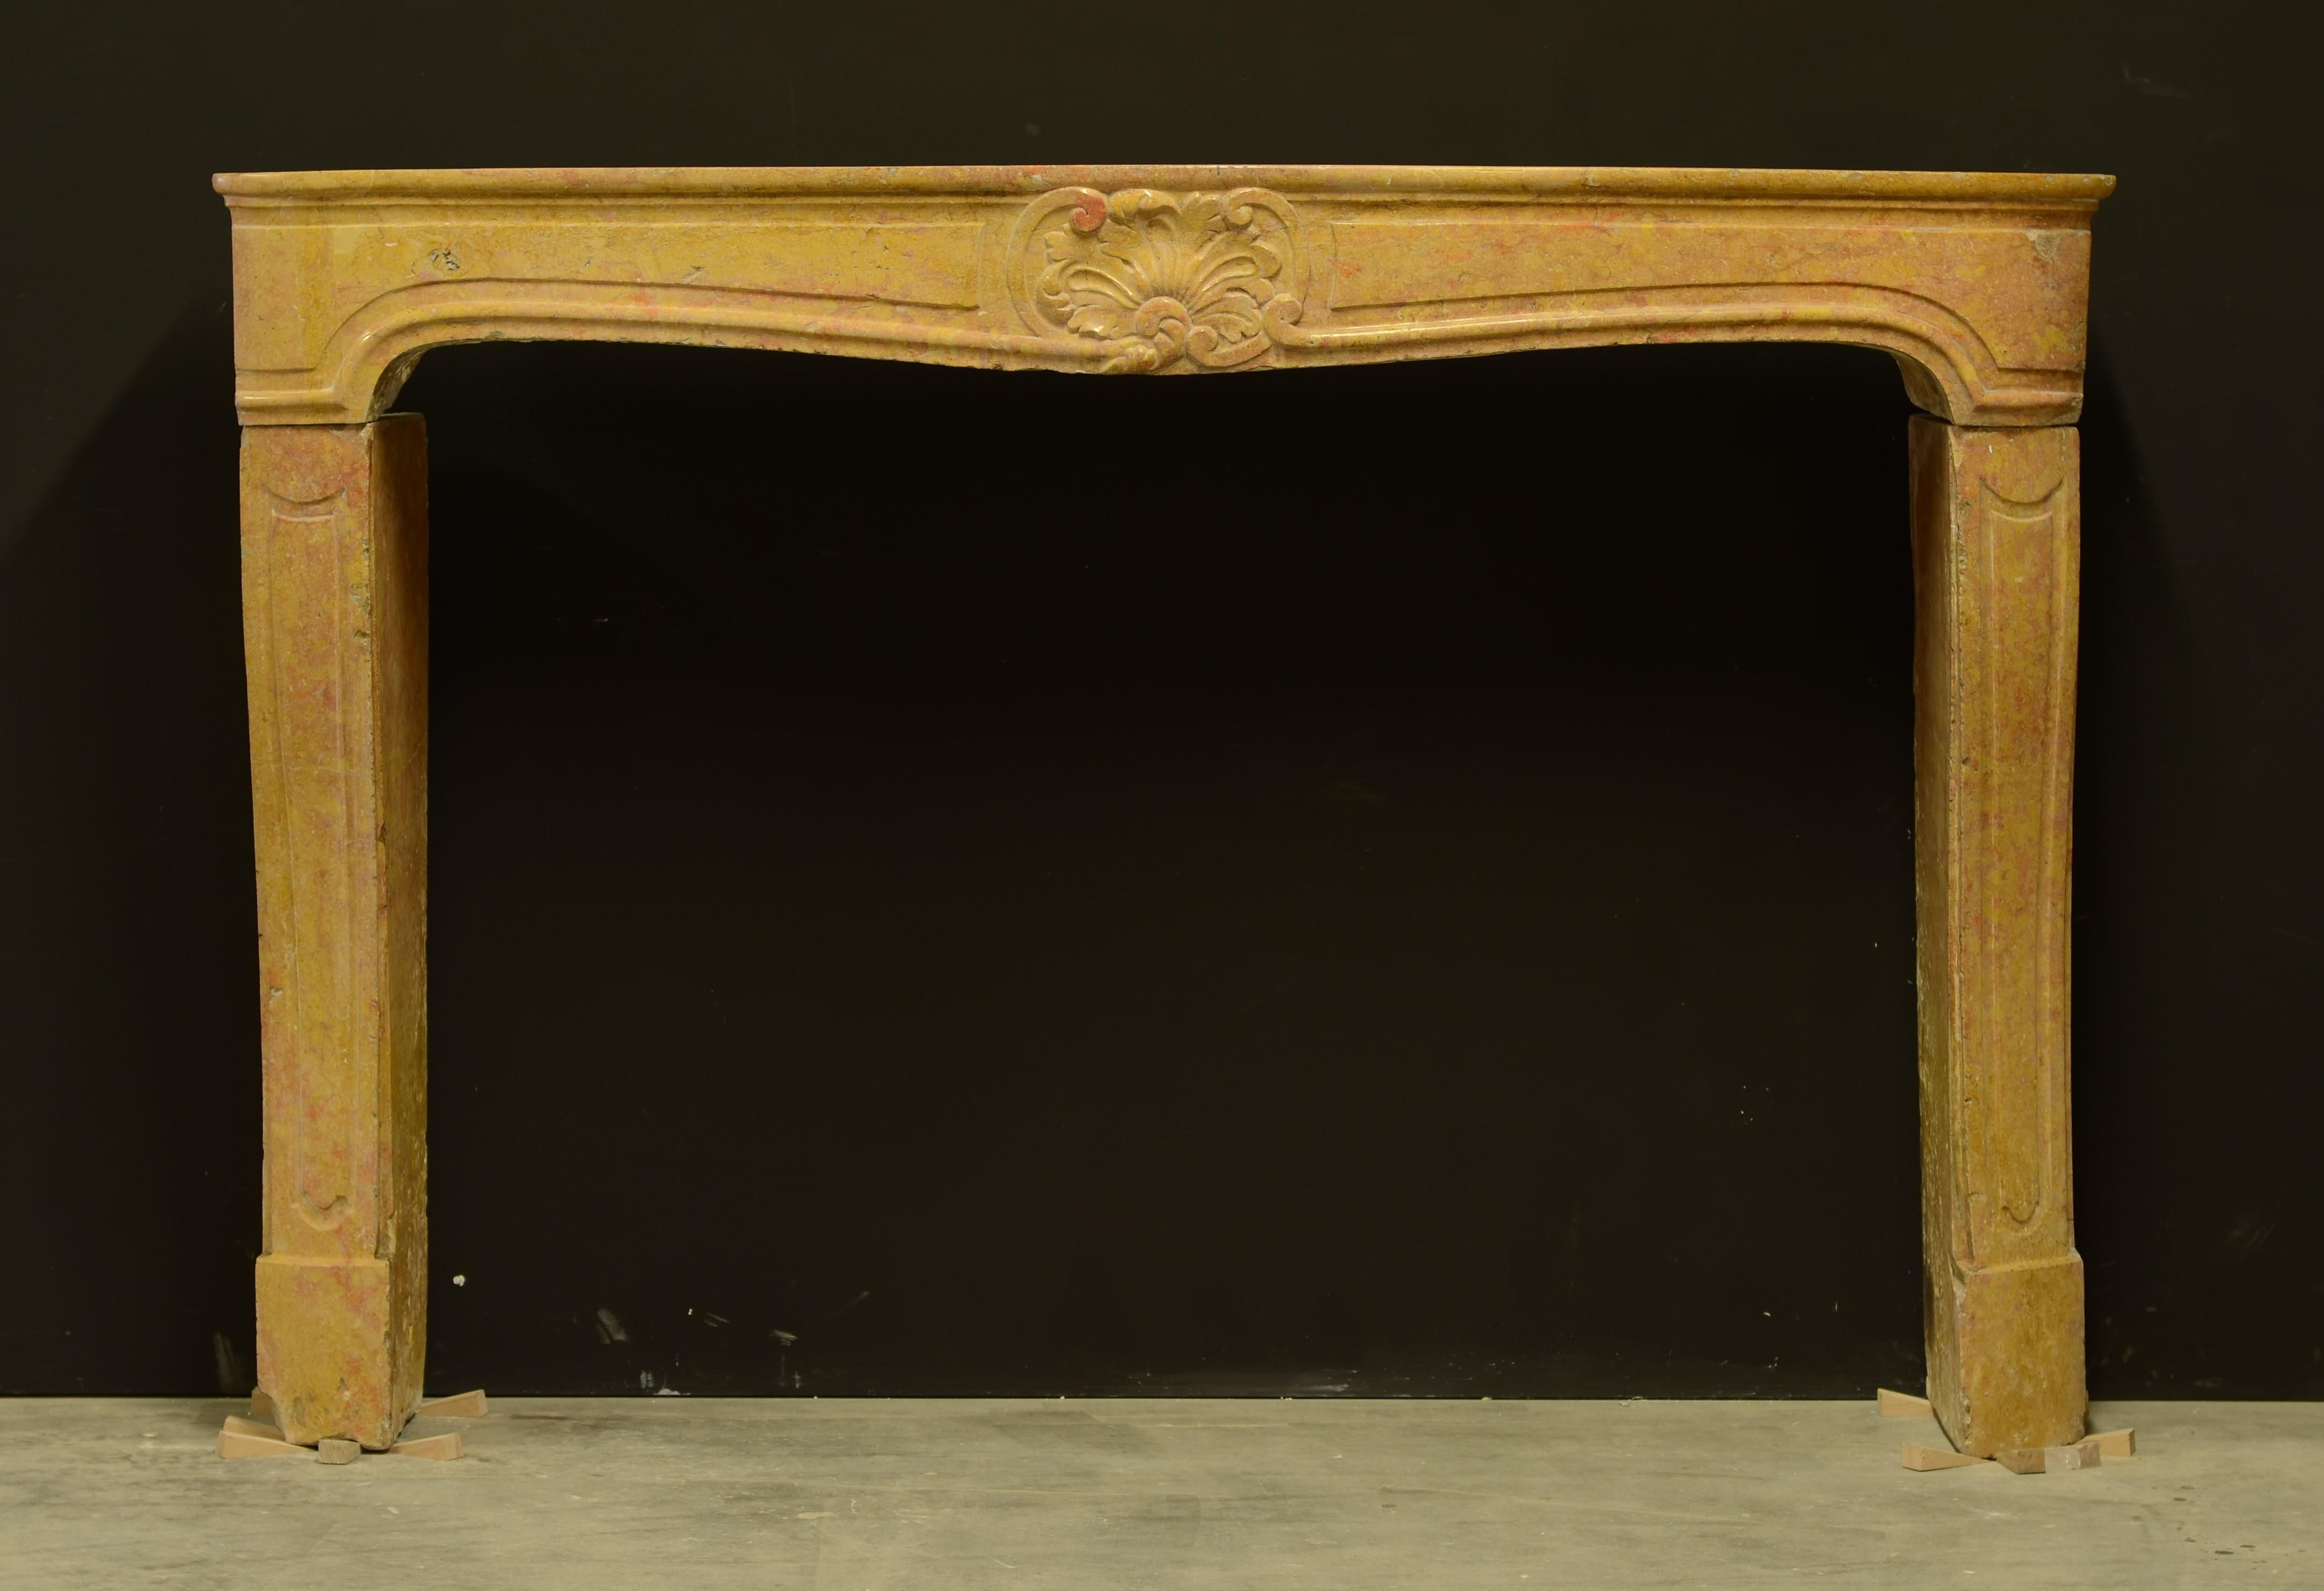 Lovely soft toned yellow limestone with hints of red.

This subtle French mantel dates back to the beginning of the 19th century.

Some minor overall restorations and damages, left corner of the frieze has been extensively restored. Please see